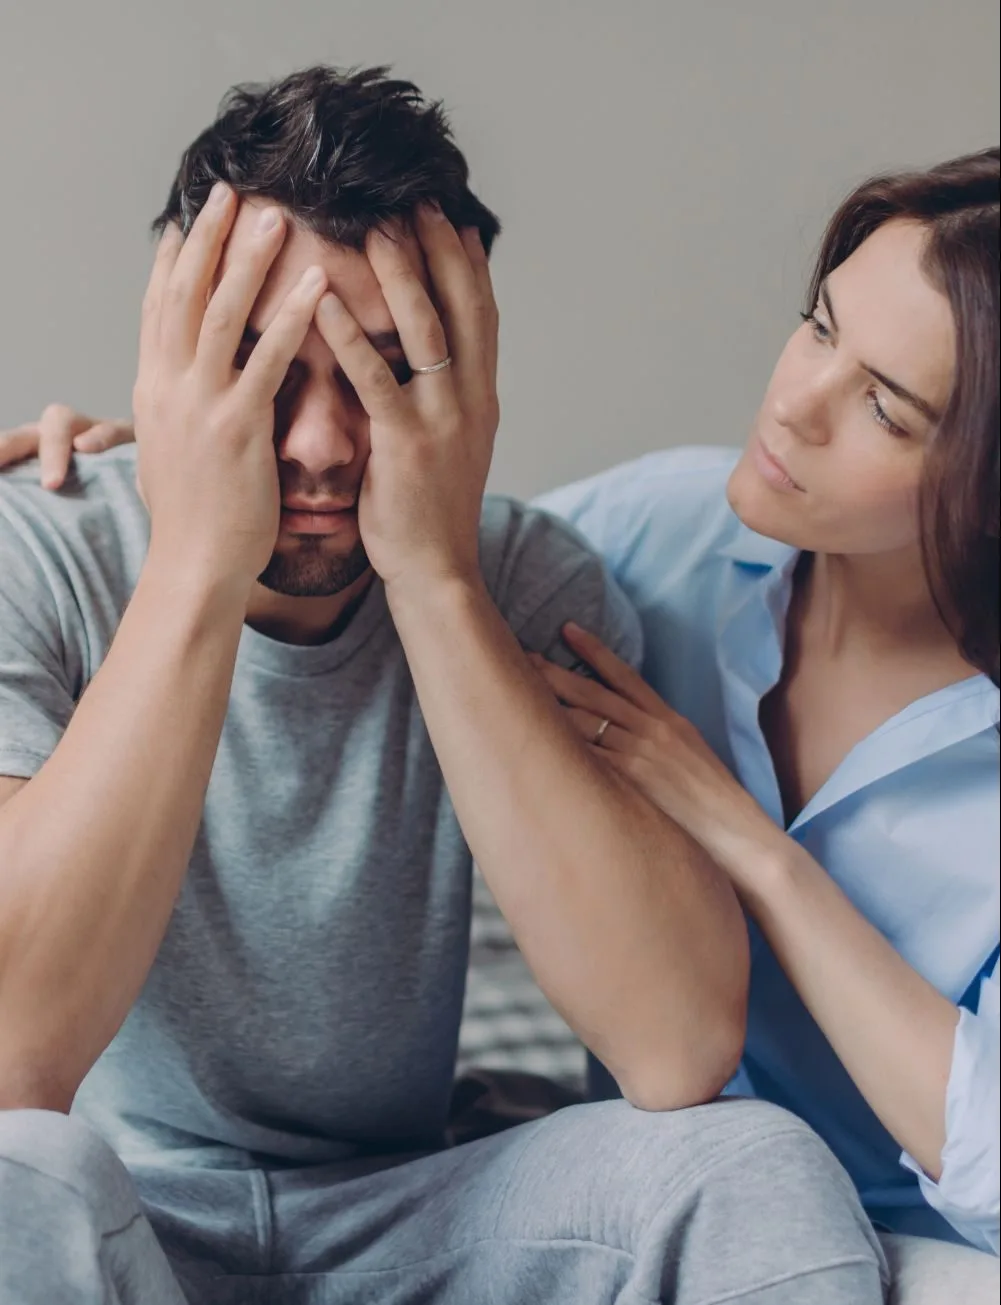 What To Do When Your Boyfriend Is Stressed And Distant